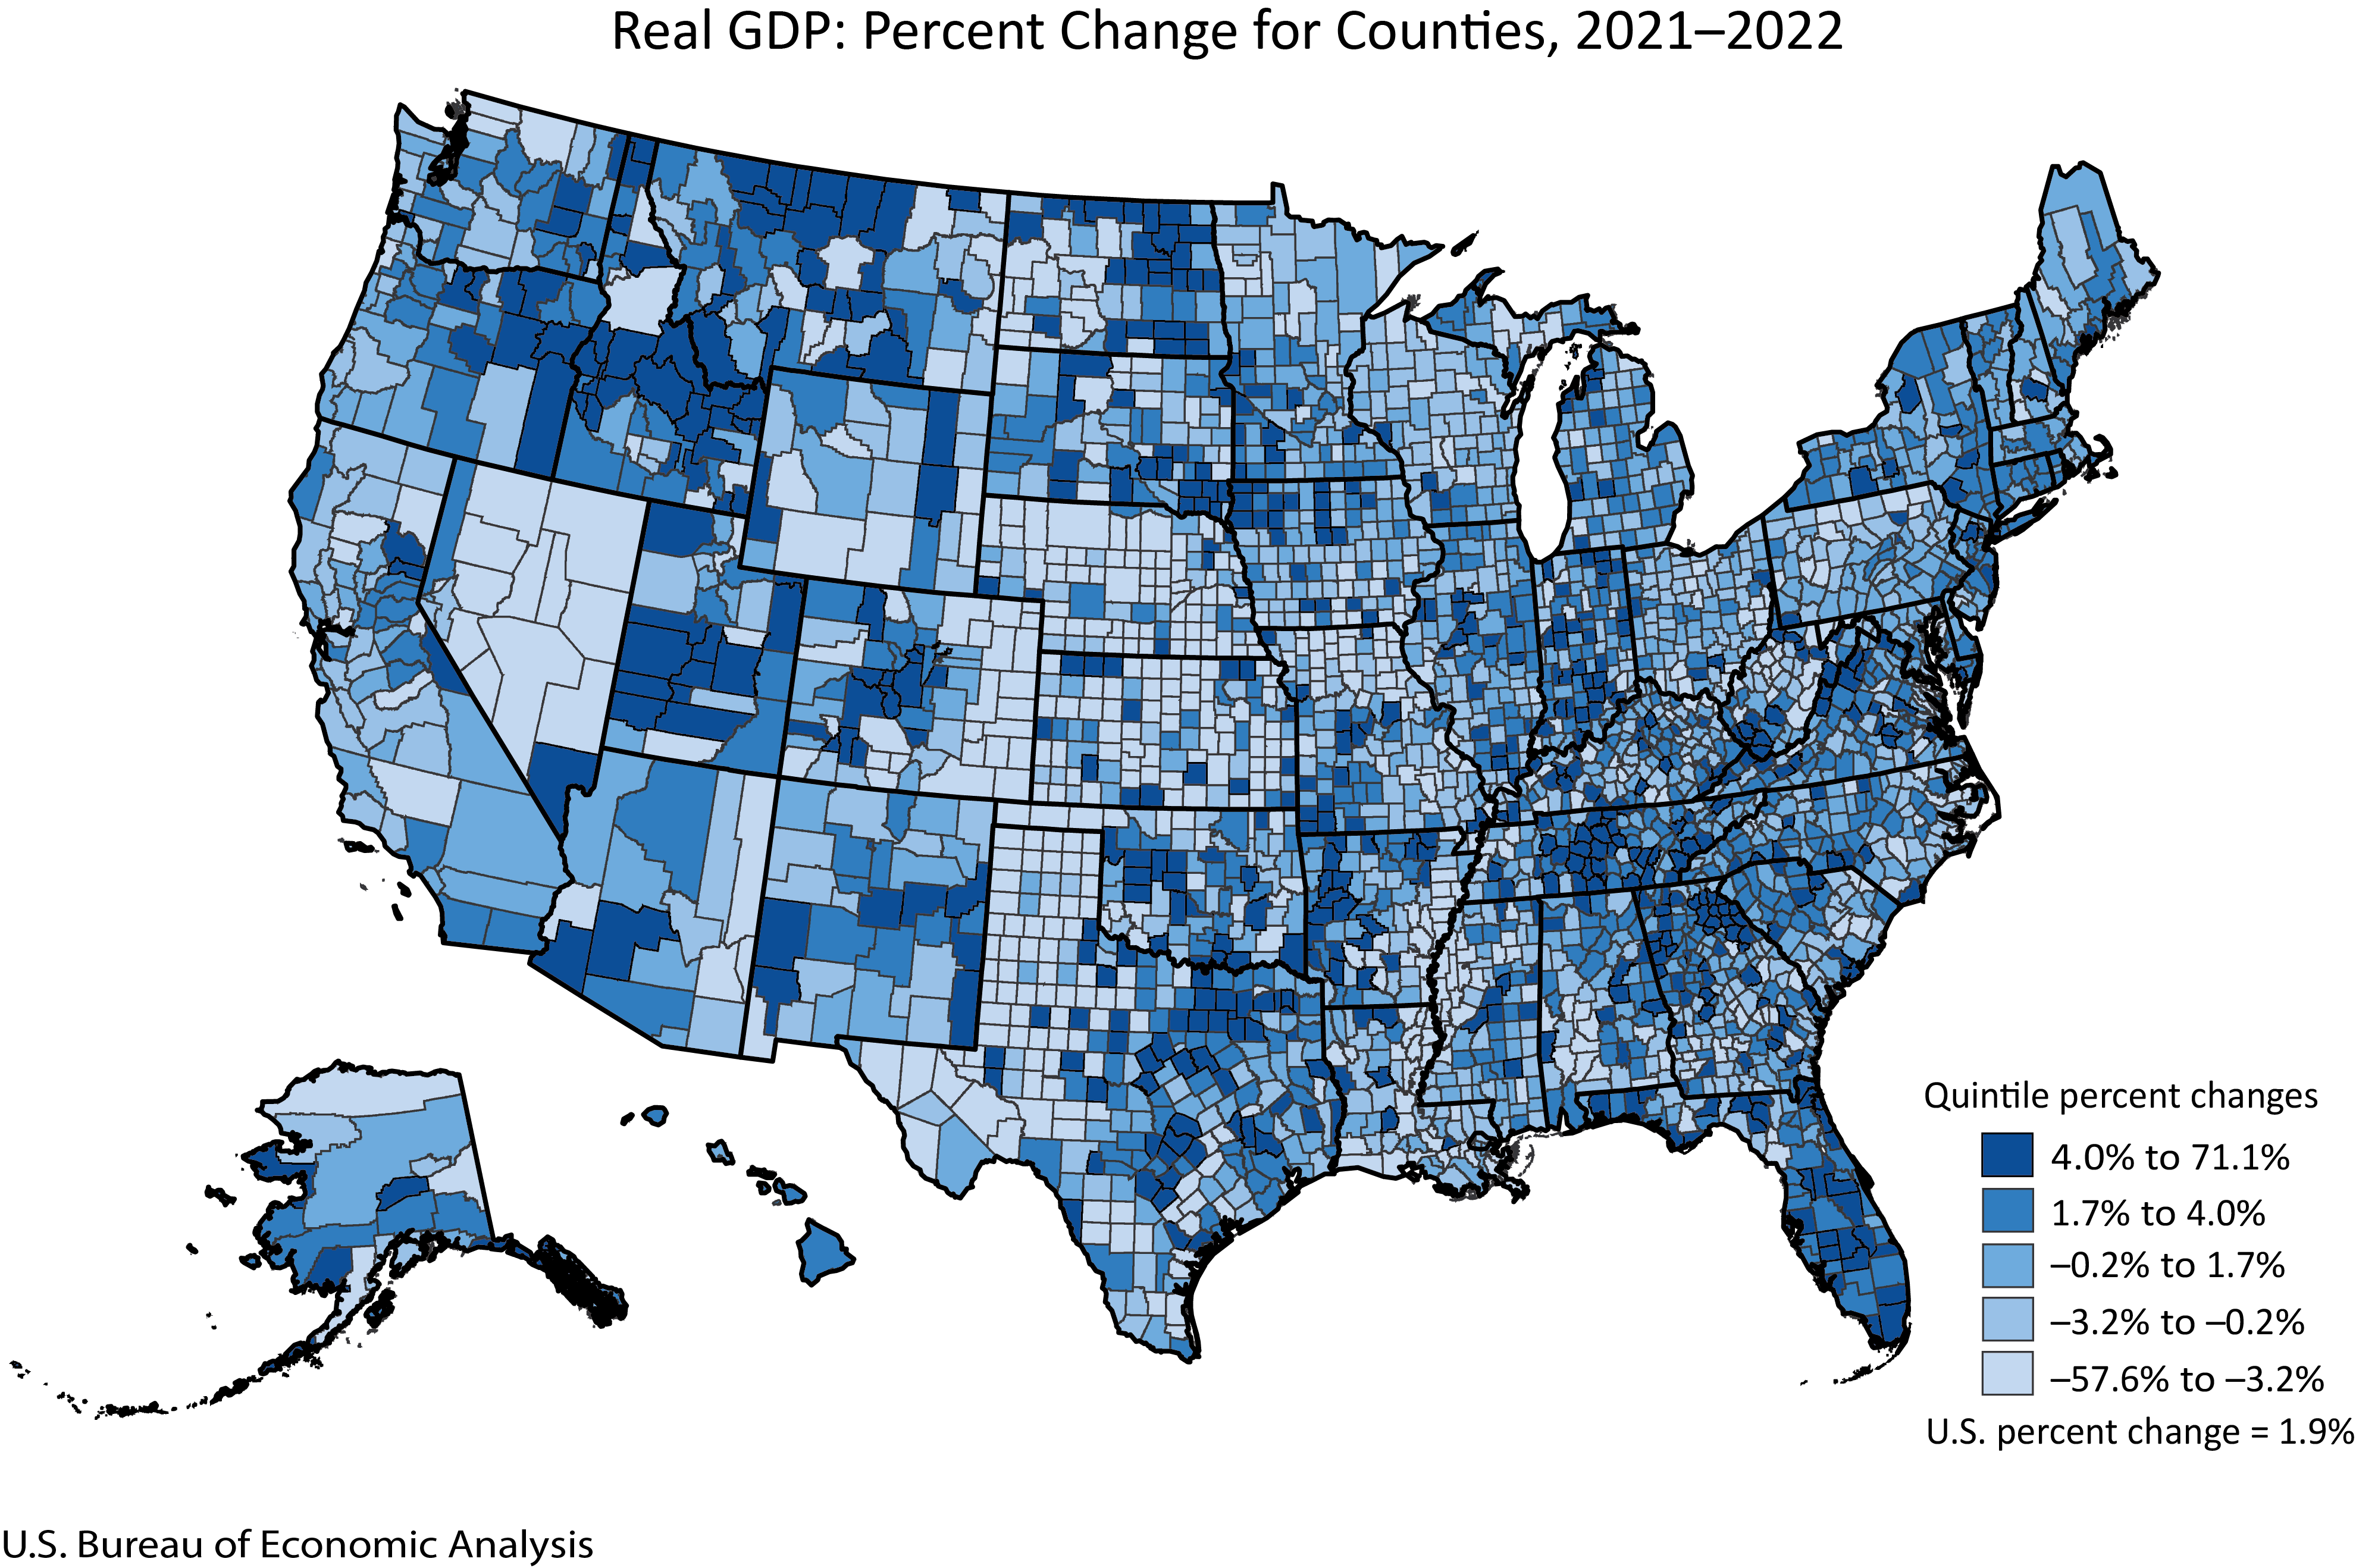 map: Real GDP: Percent Change for Counties, 2021-2022